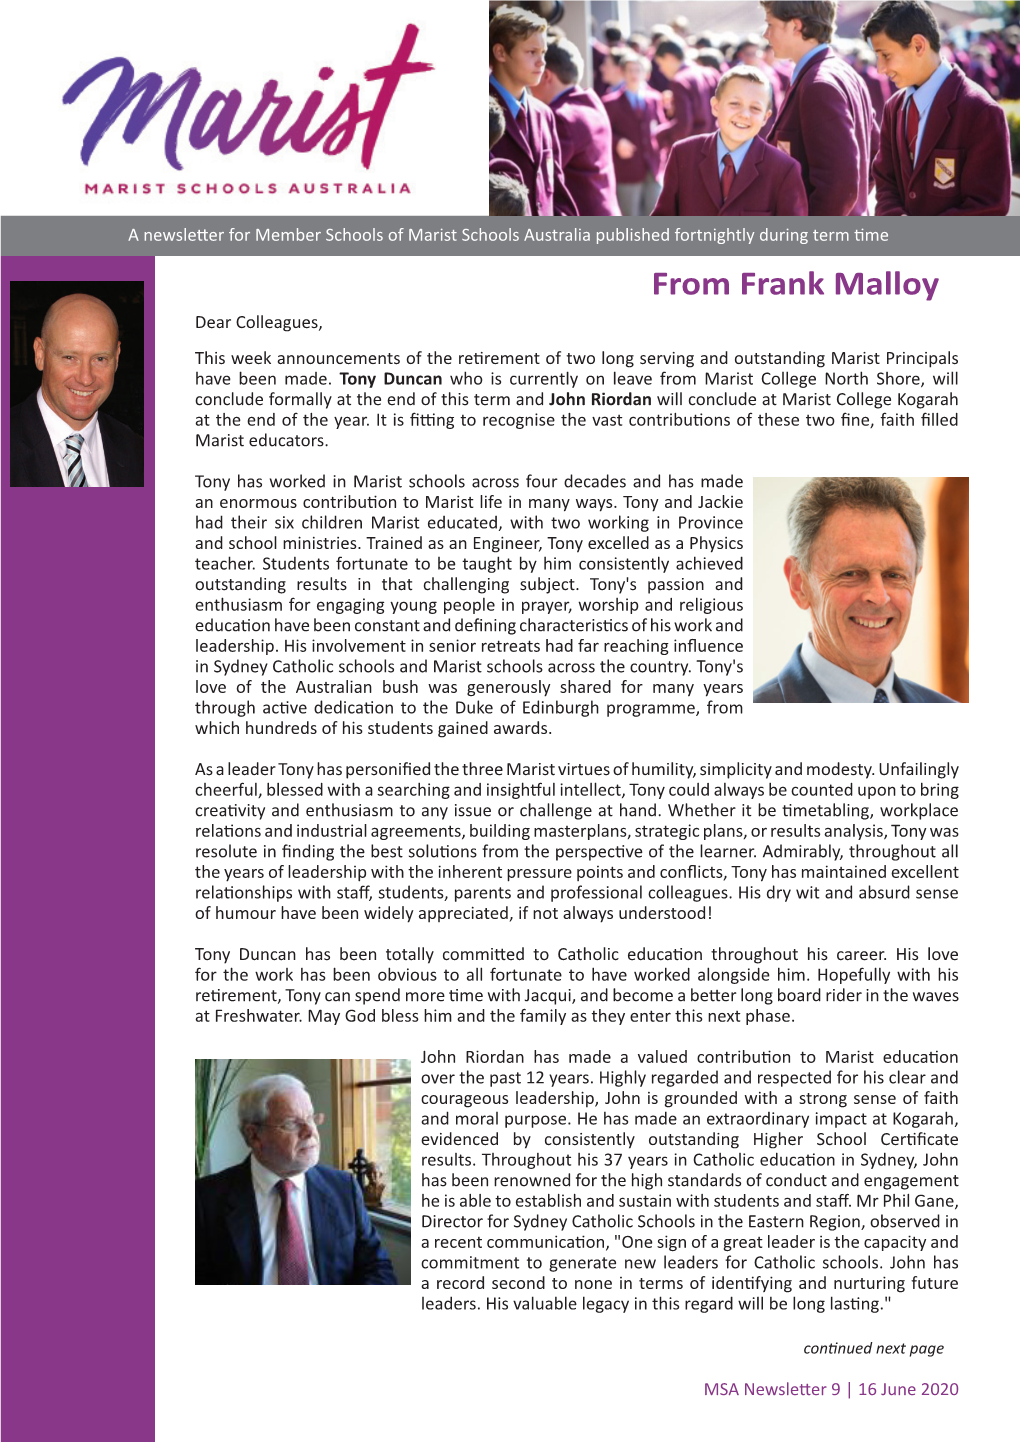 From Frank Malloy Dear Colleagues, This Week Announcements of the Retirement of Two Long Serving and Outstanding Marist Principals Have Been Made